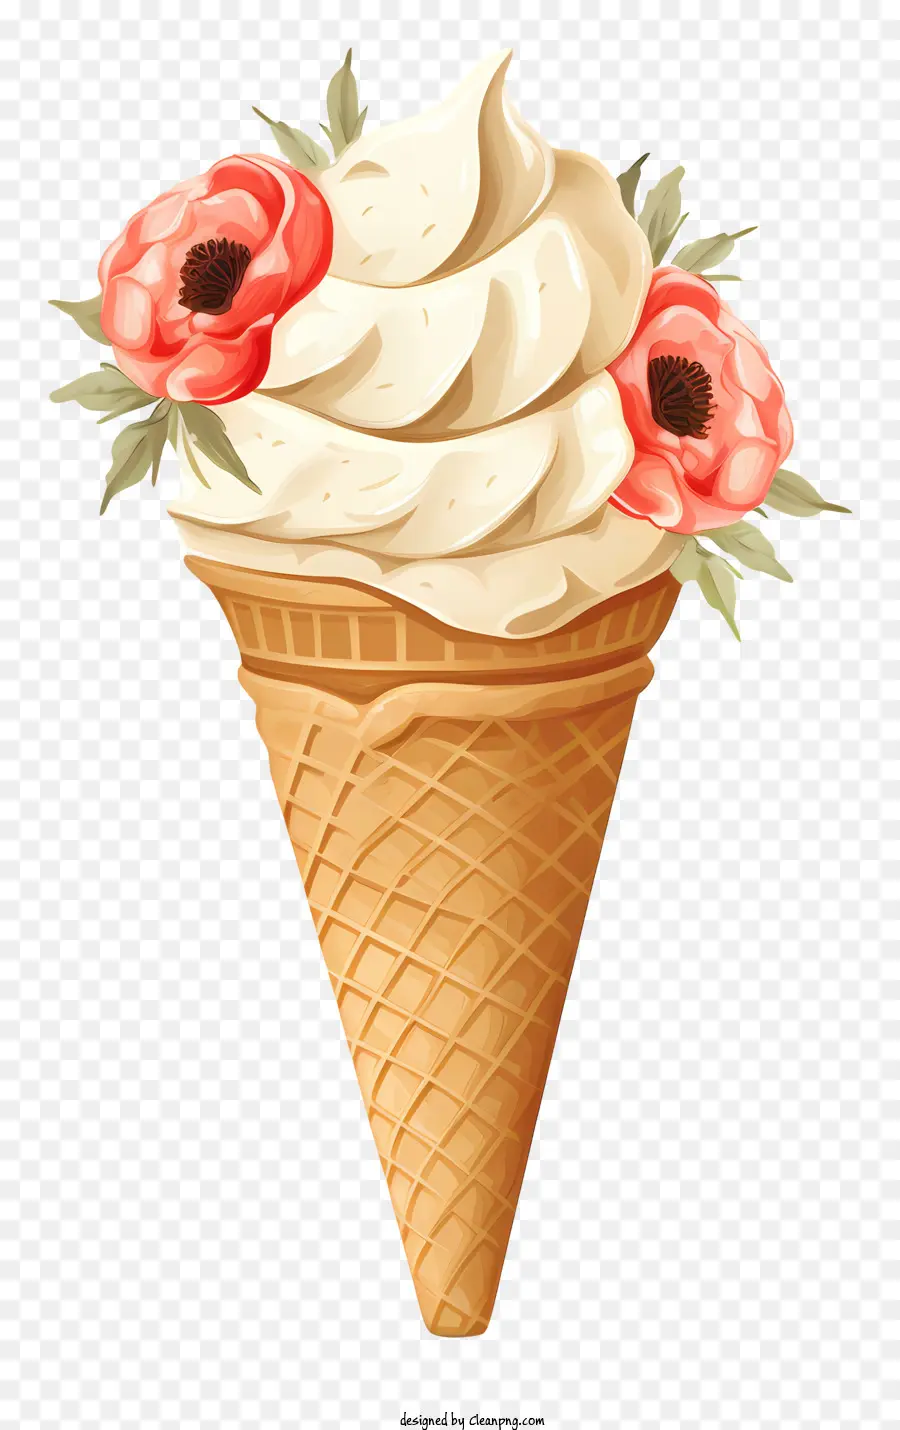 ice cream cone whipped cream topping red flowers cone shaped container creamy white ice cream